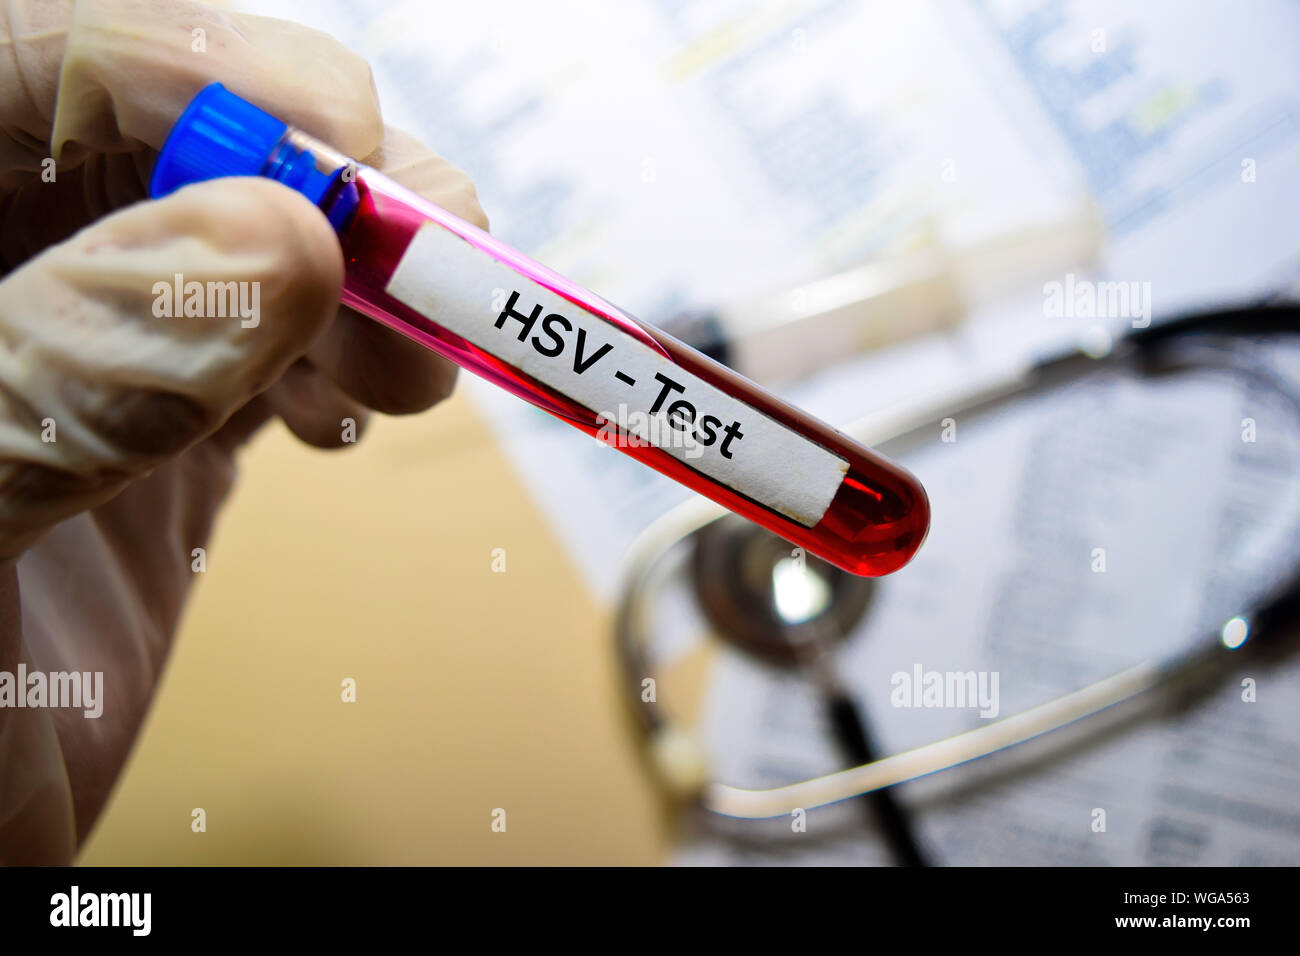 HSV - Test with blood sample. Top view isolated on office desk. Healthcare/Medical concept Stock Photo